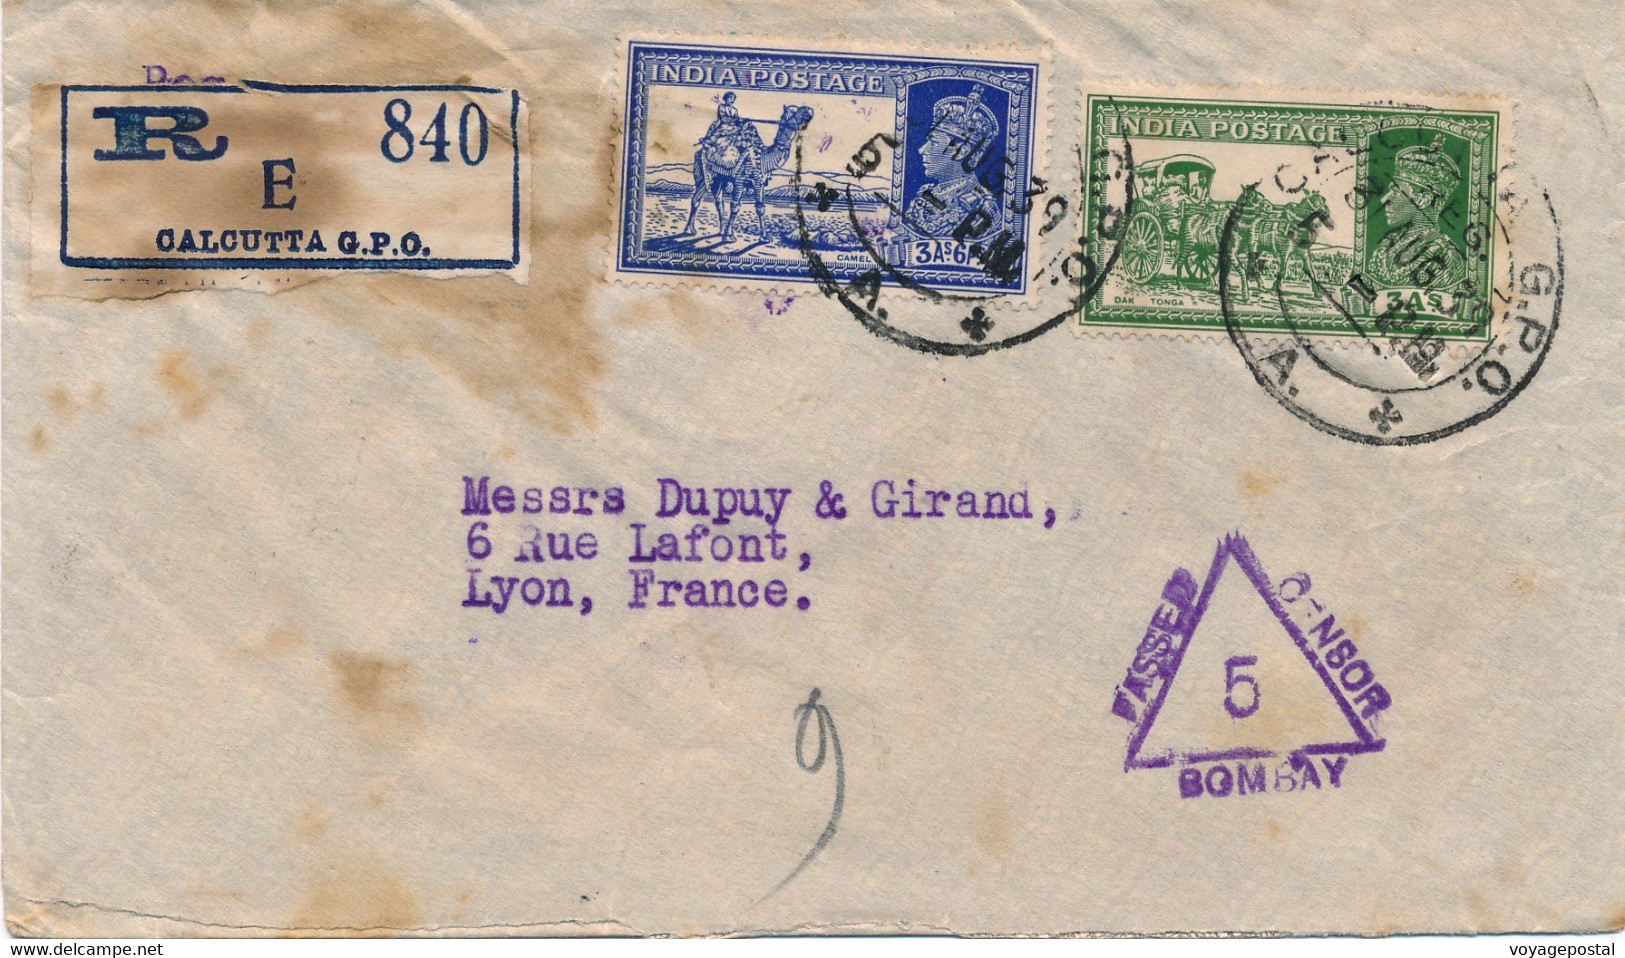 LETTRE RECOMMANDÉE CALCUTTA INDE PASSED CENSOR BOMBAY FRANCE CINDERELLA BANK COVER INDIA - 1936-47 Roi Georges VI